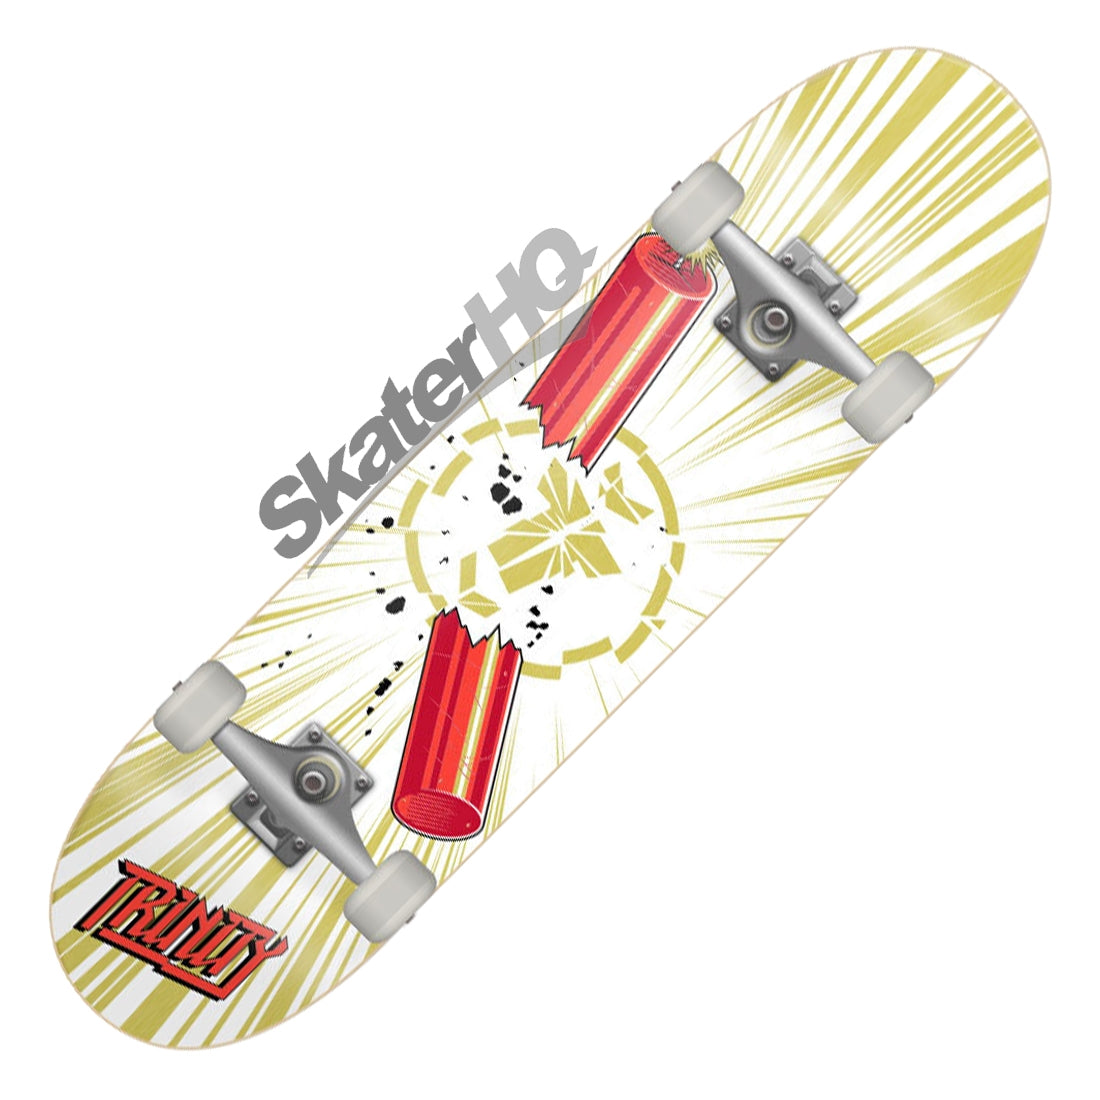 Trinity Dynamite Pro 7.75 Complete Skateboard Compl Cruisers